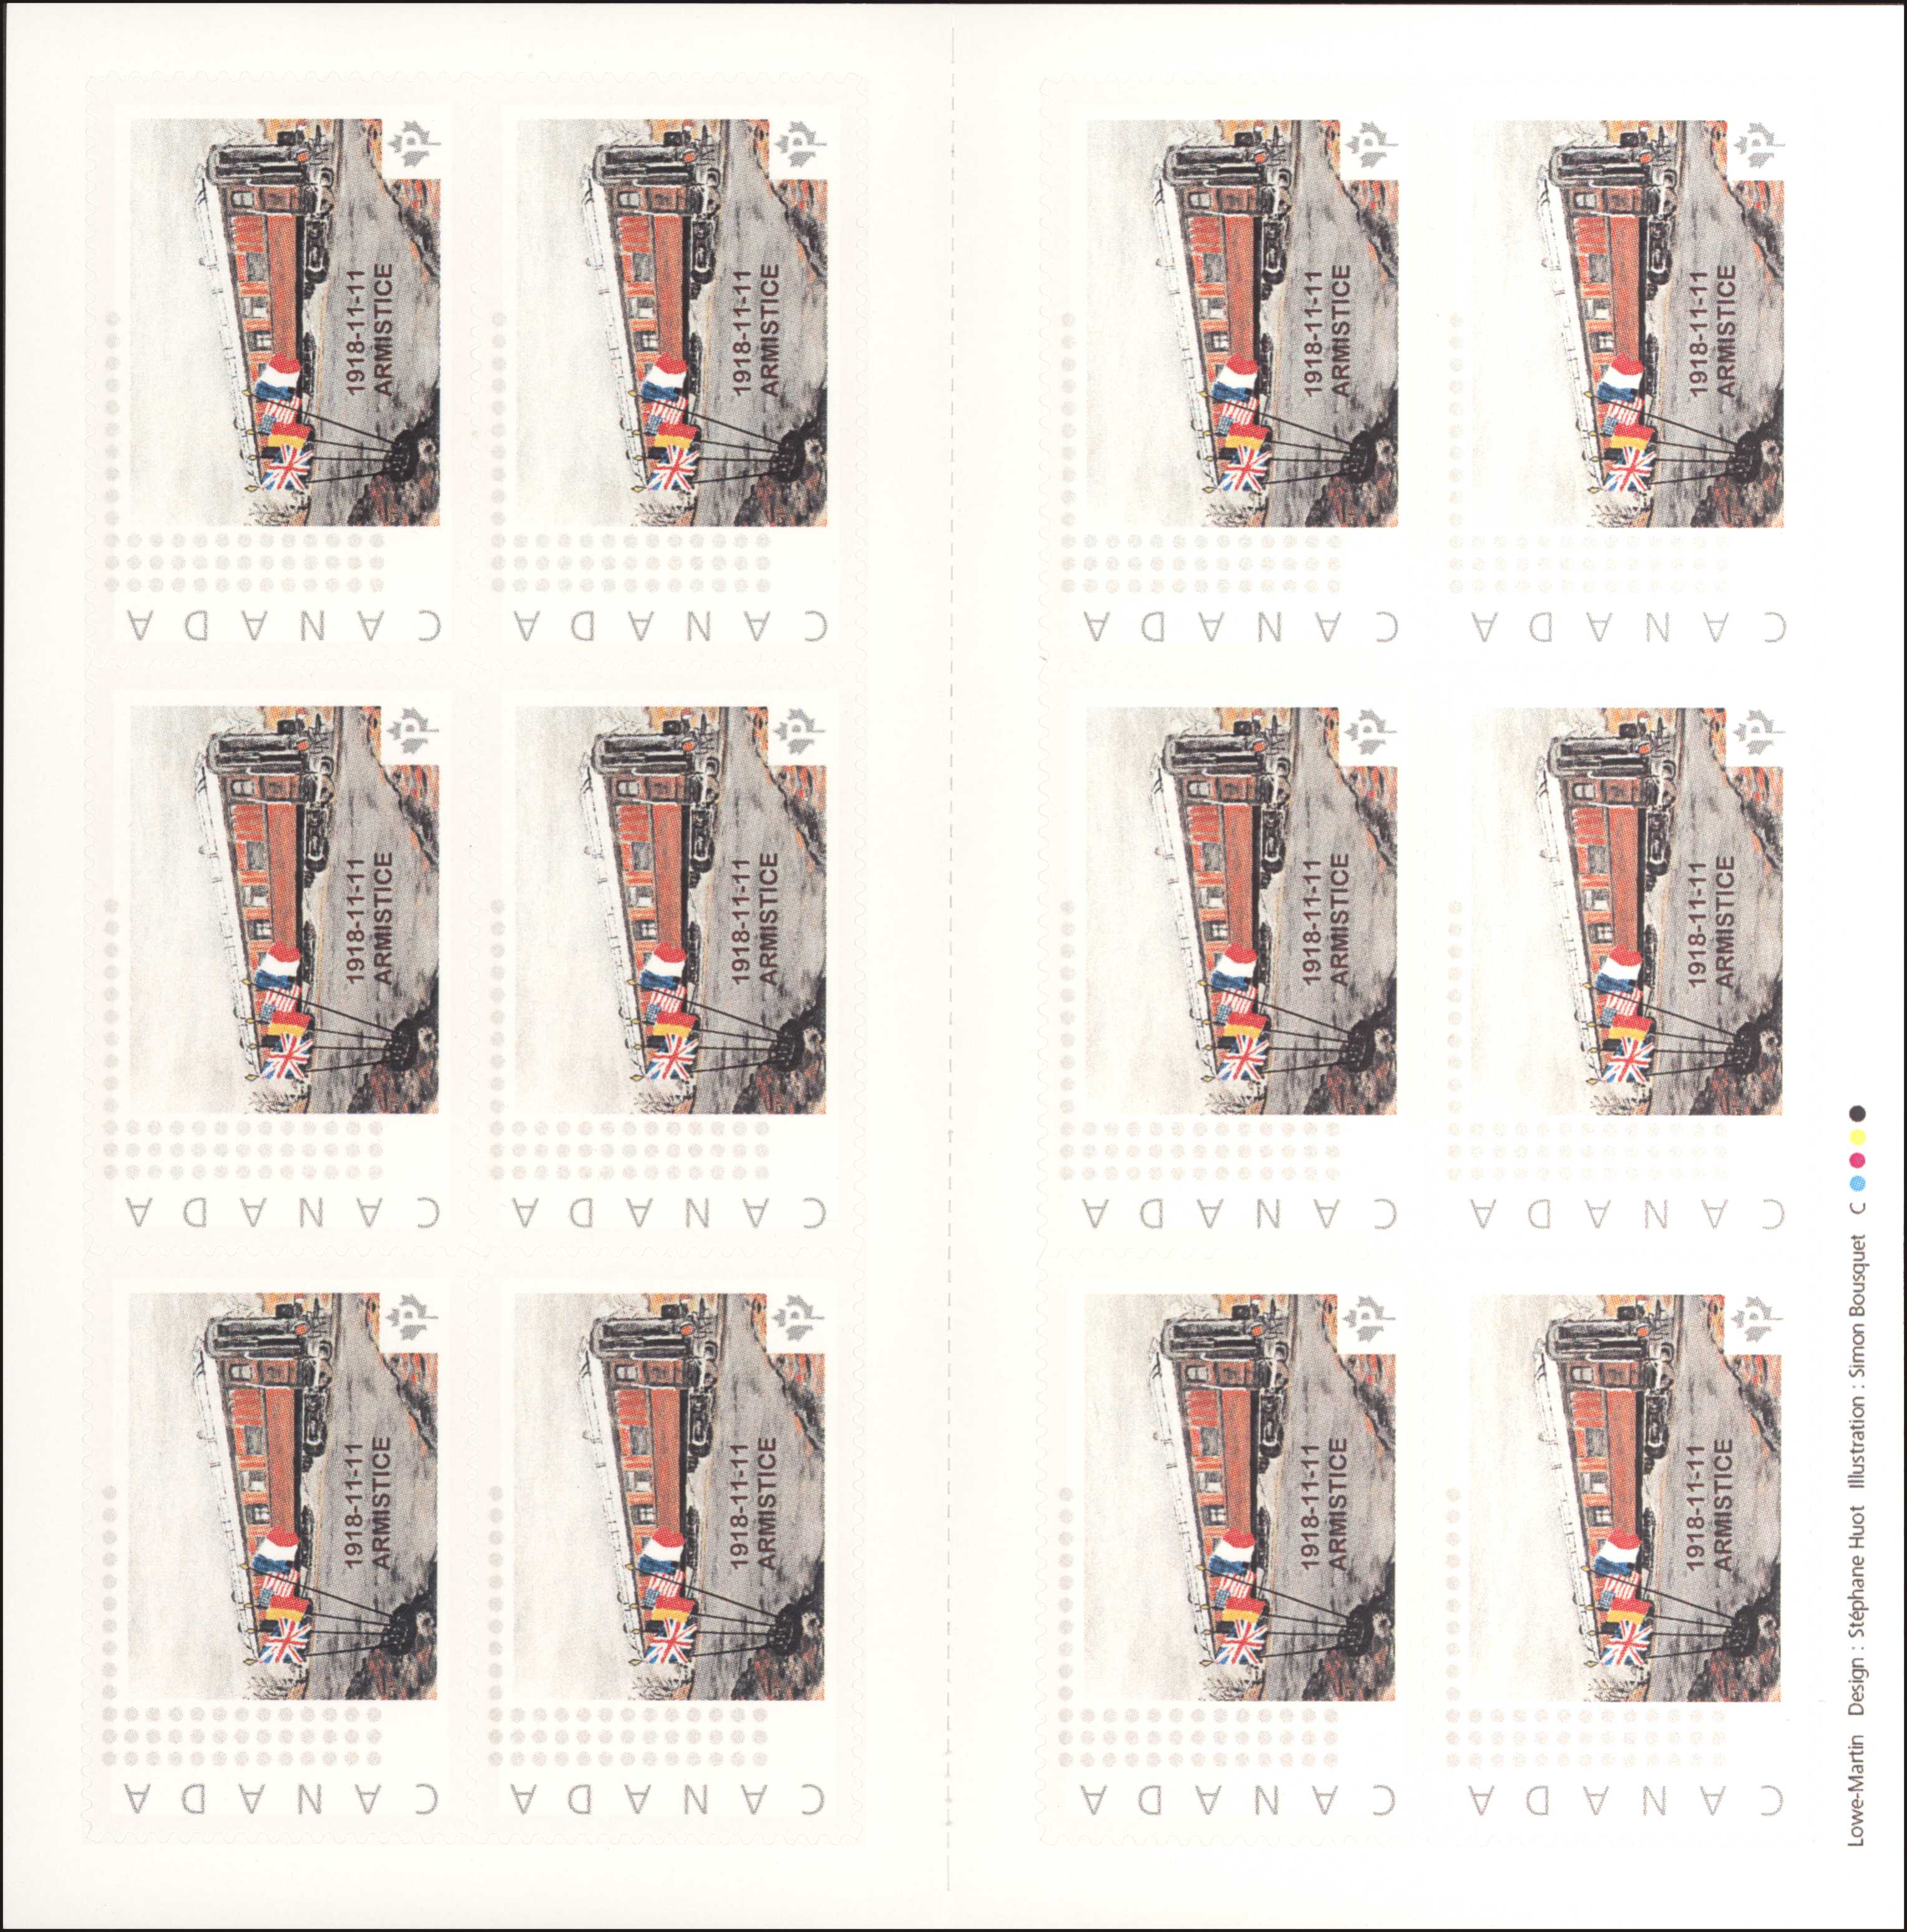 Inside of the booklet of 12 stamps commemorating the 100th Anniversary of the 1918 Armistice